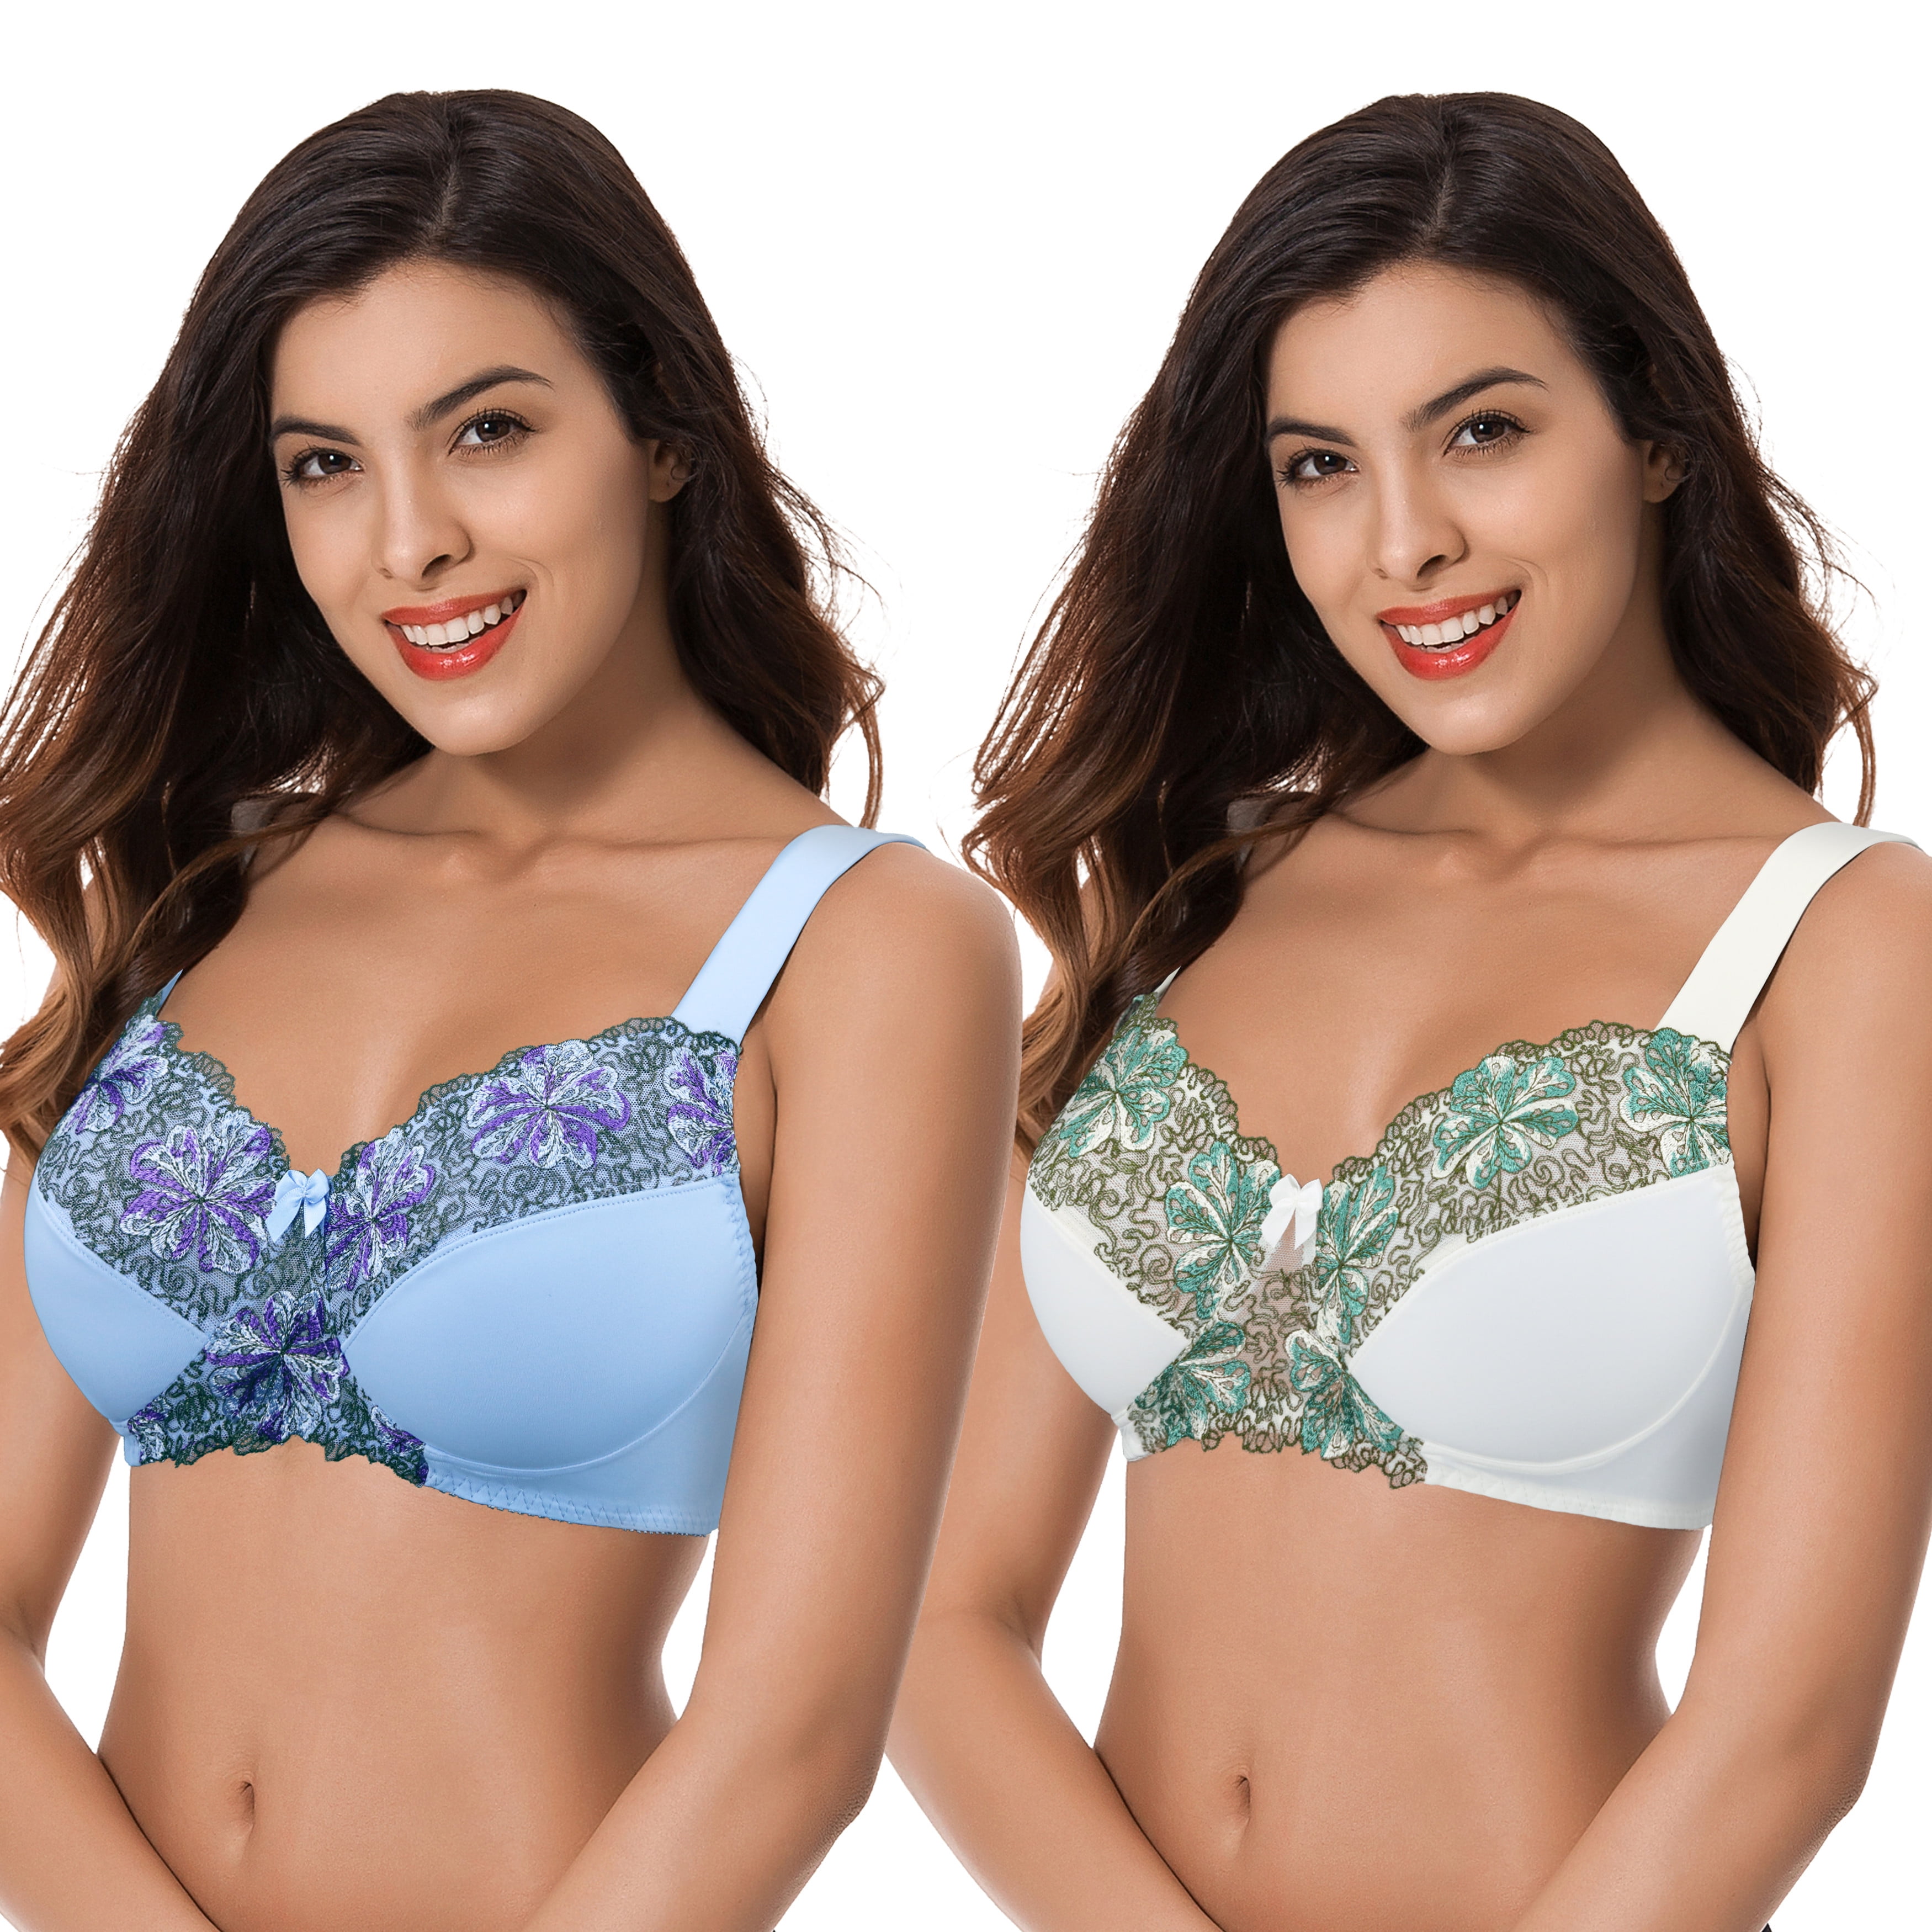 Curve Muse Women's Plus Size Minimizer Wireless Unlined Bra with Embroidery  Lace-2Pack-BUTTERMILK,SERENITY-36DDDD